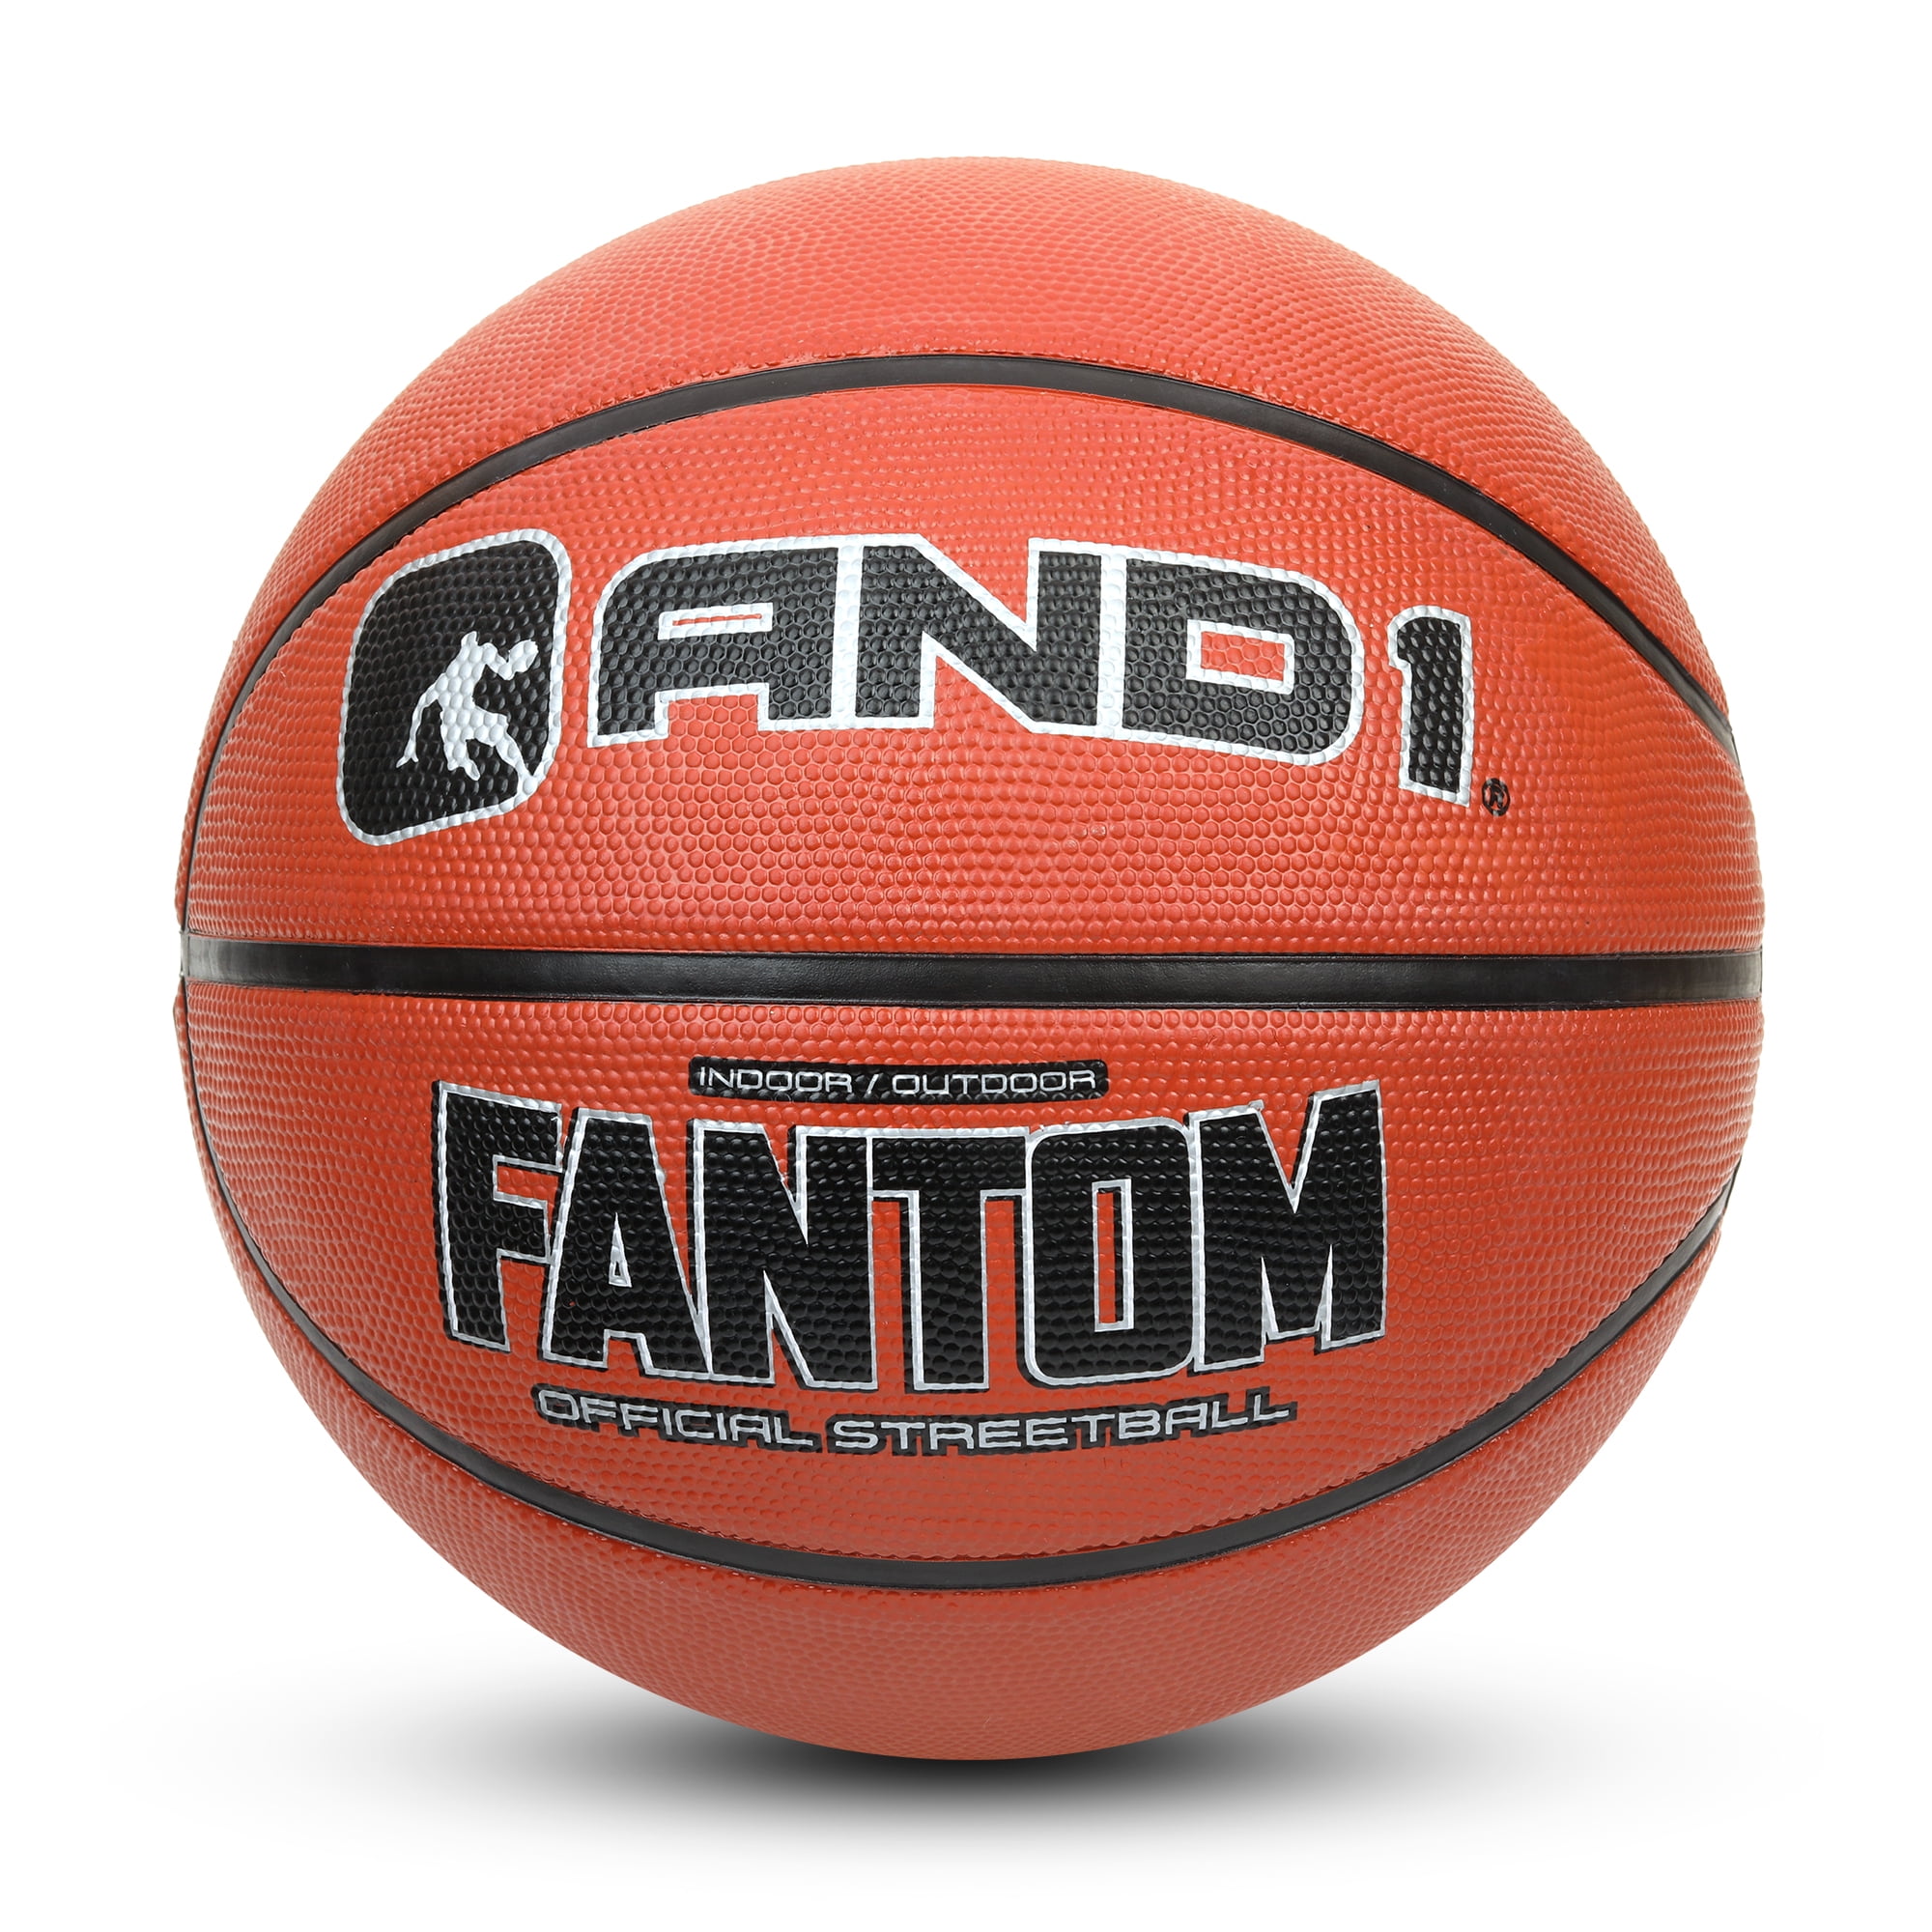 Made for Indoor and Outdoor Basketball Games AND1 Fantom Rubber Basketball & Pump Official Size Streetball 